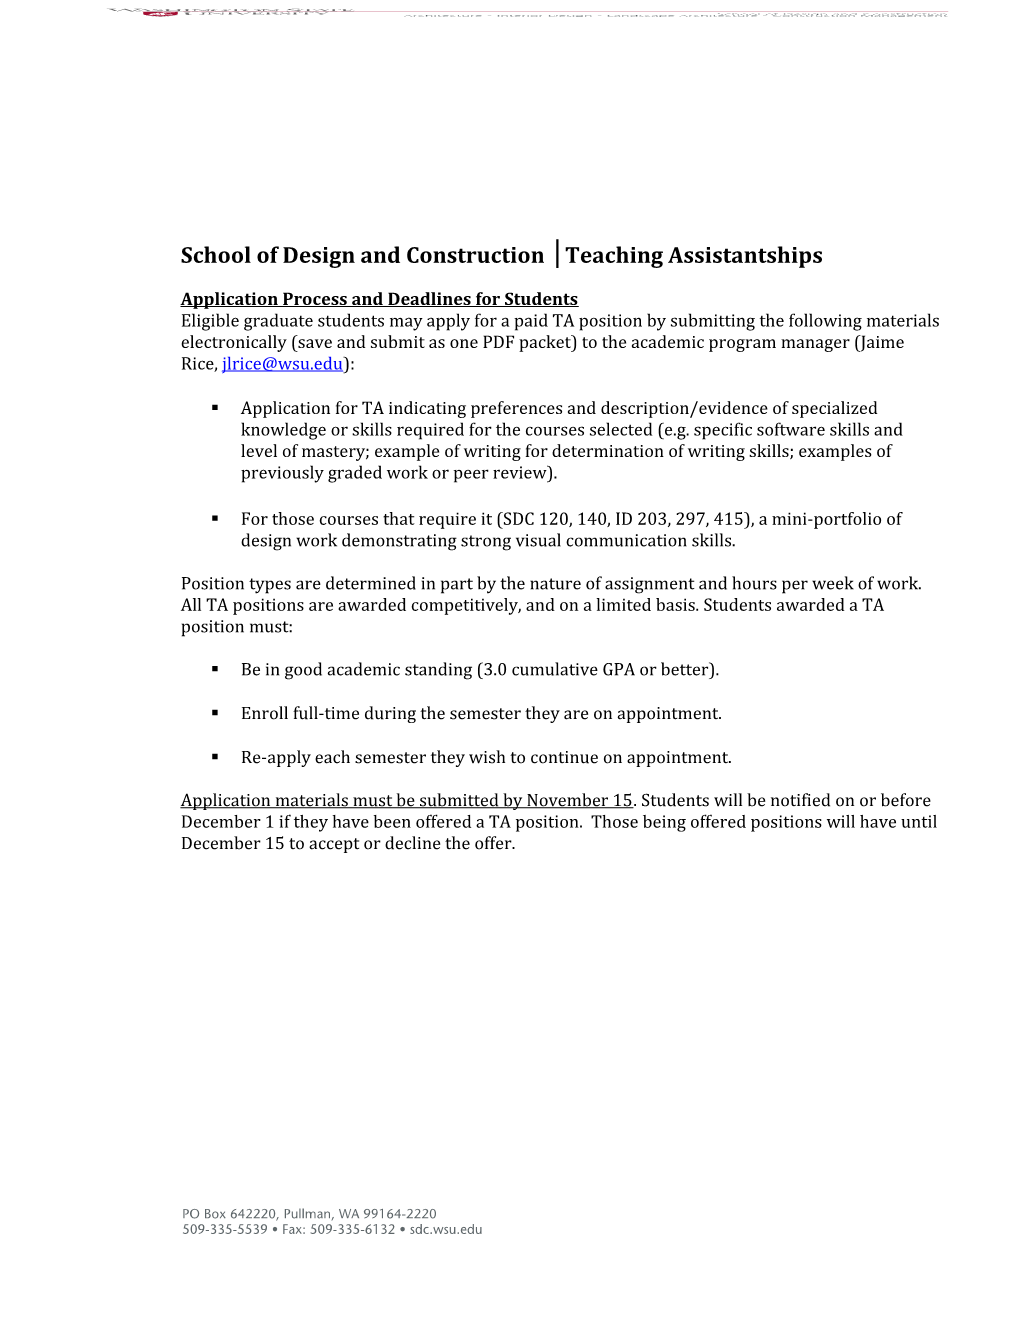 School of Design and Construction Teaching Assistantships